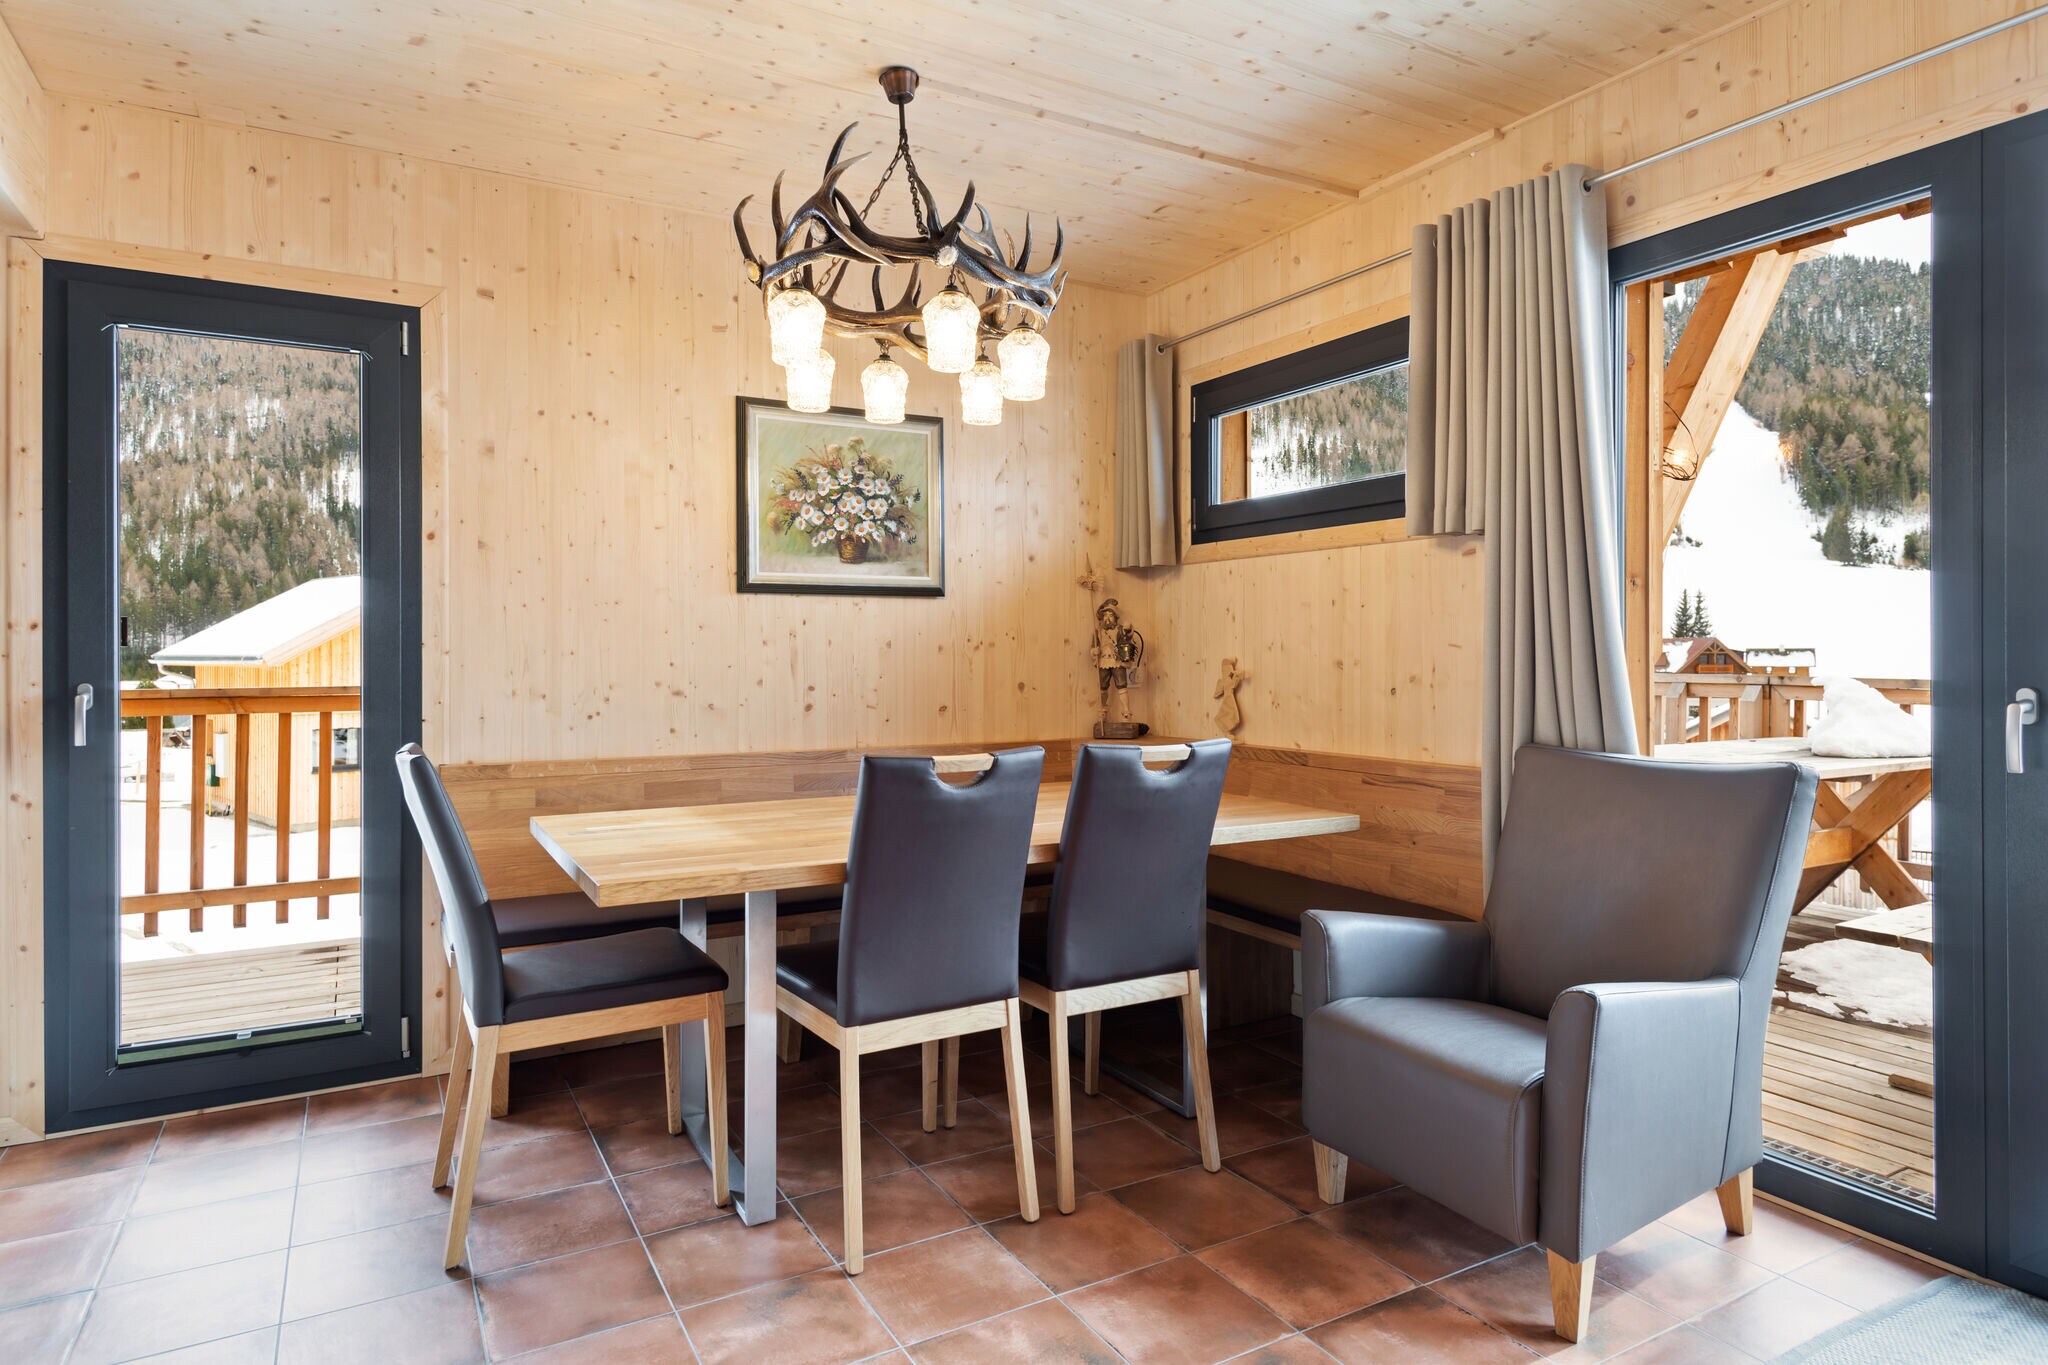 Beautiful detached wooden chalet in Hohentauern / Styria with bubble bath